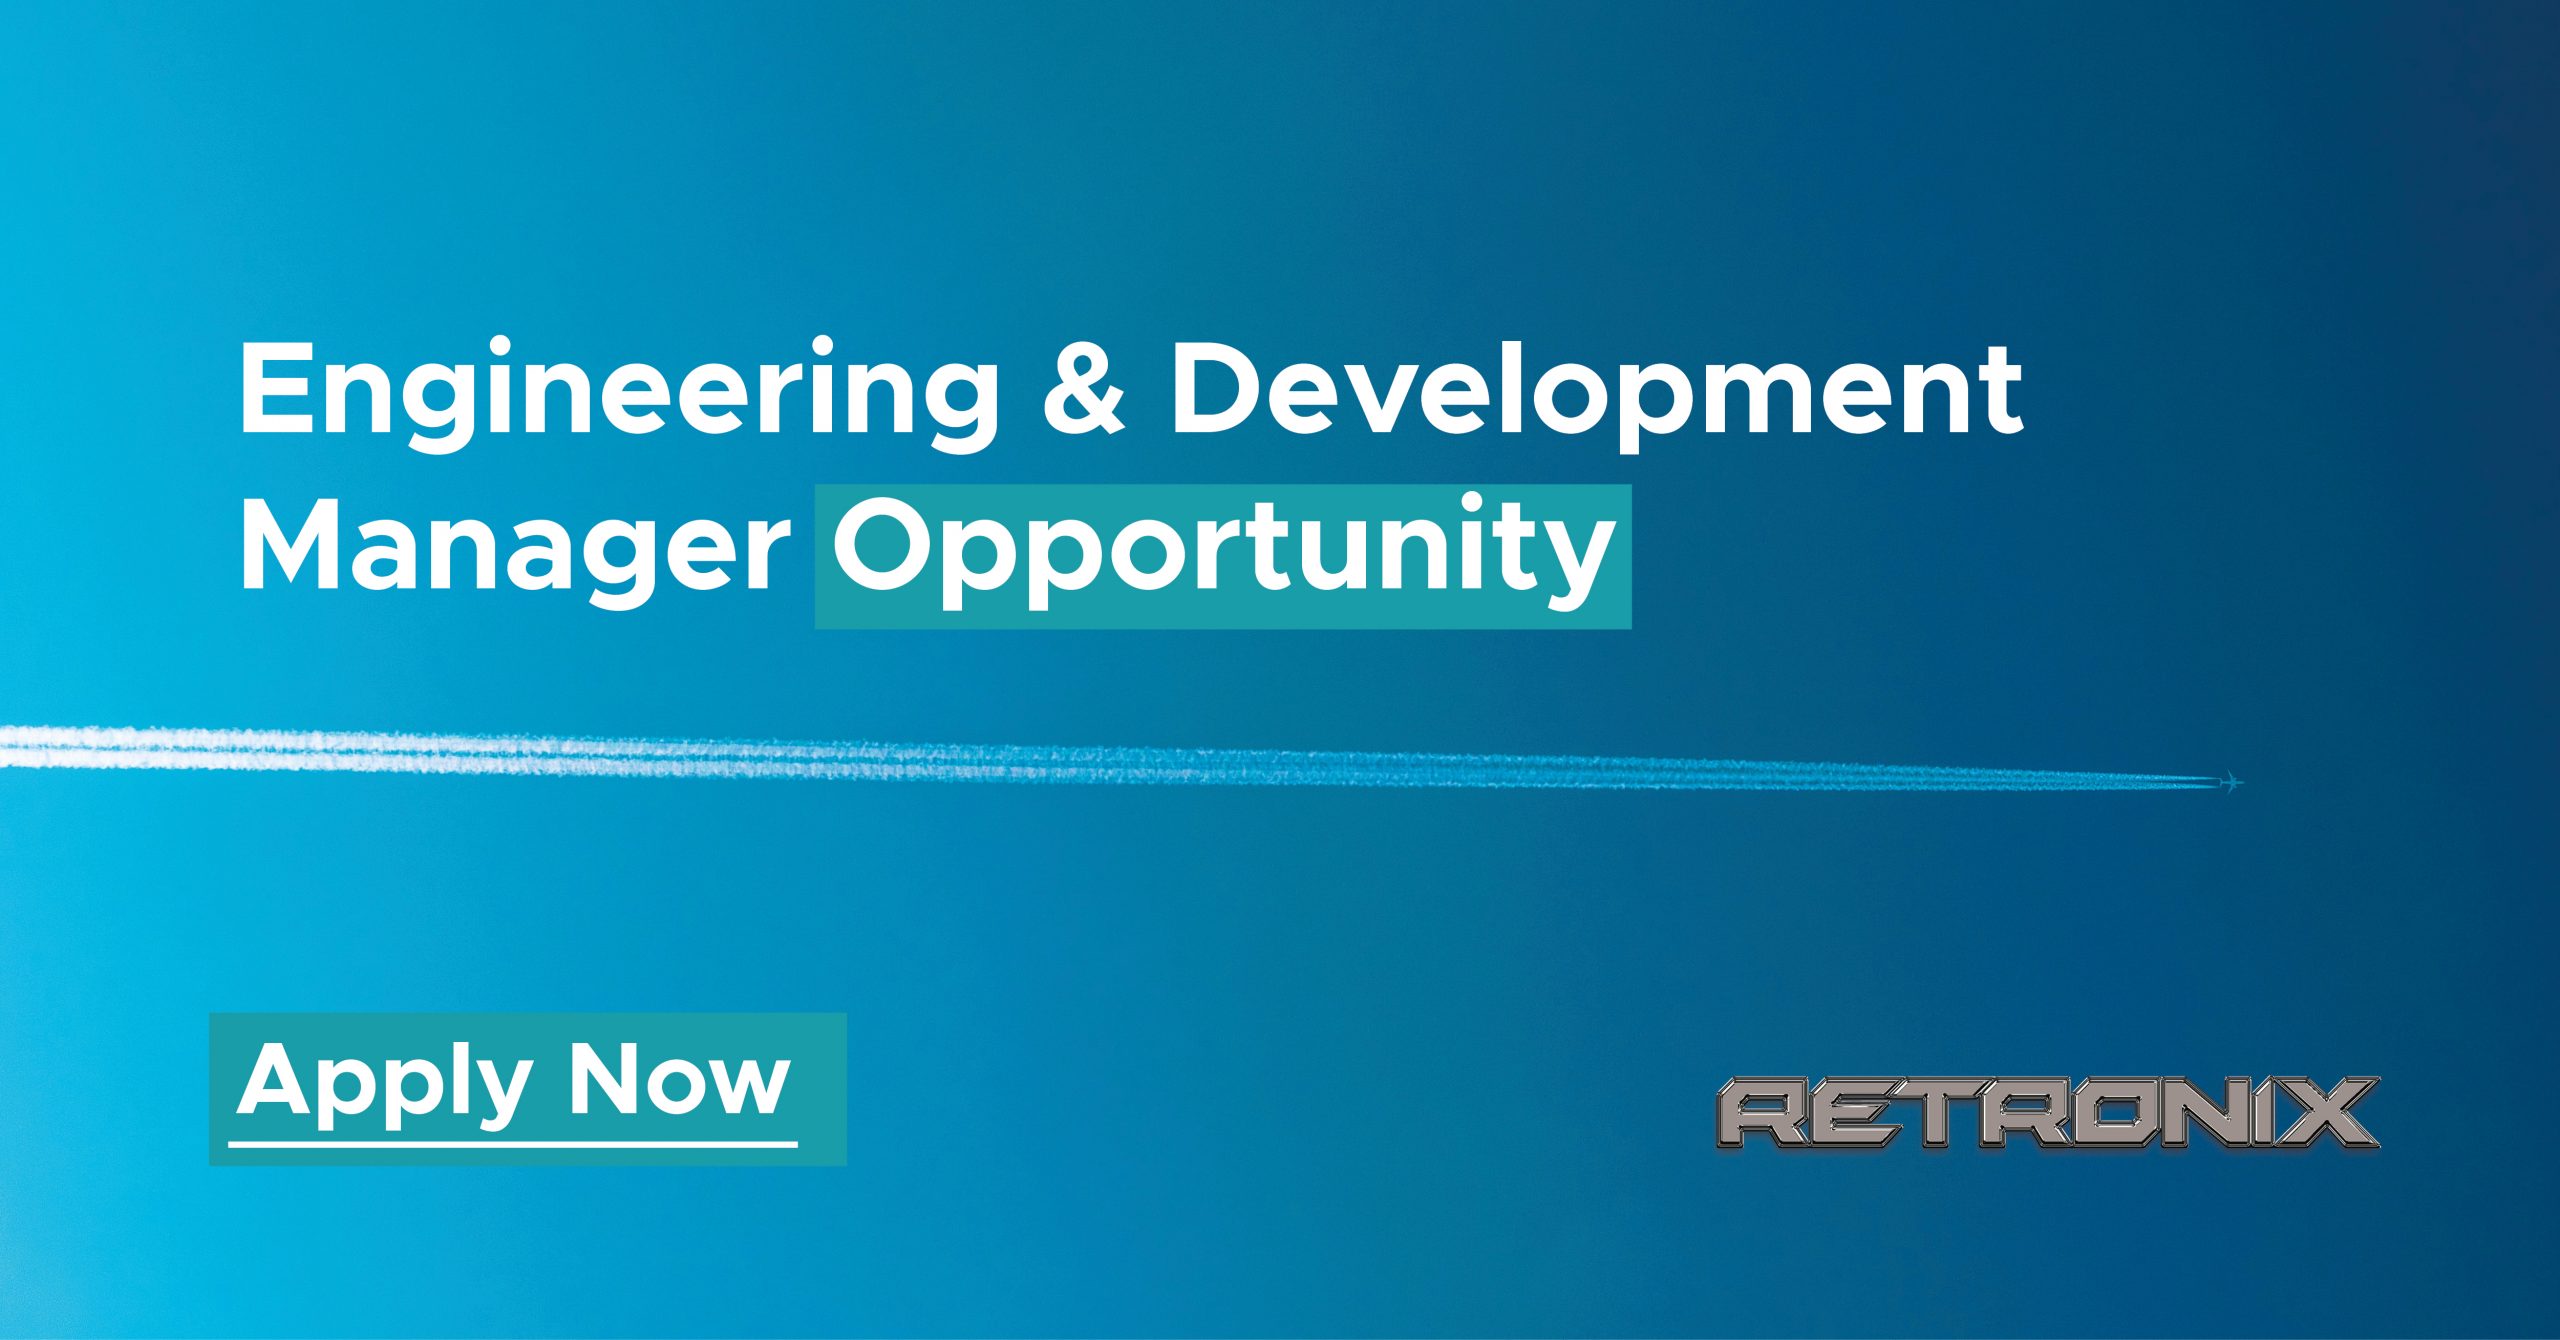 Engineering & Development Manager Opportunity